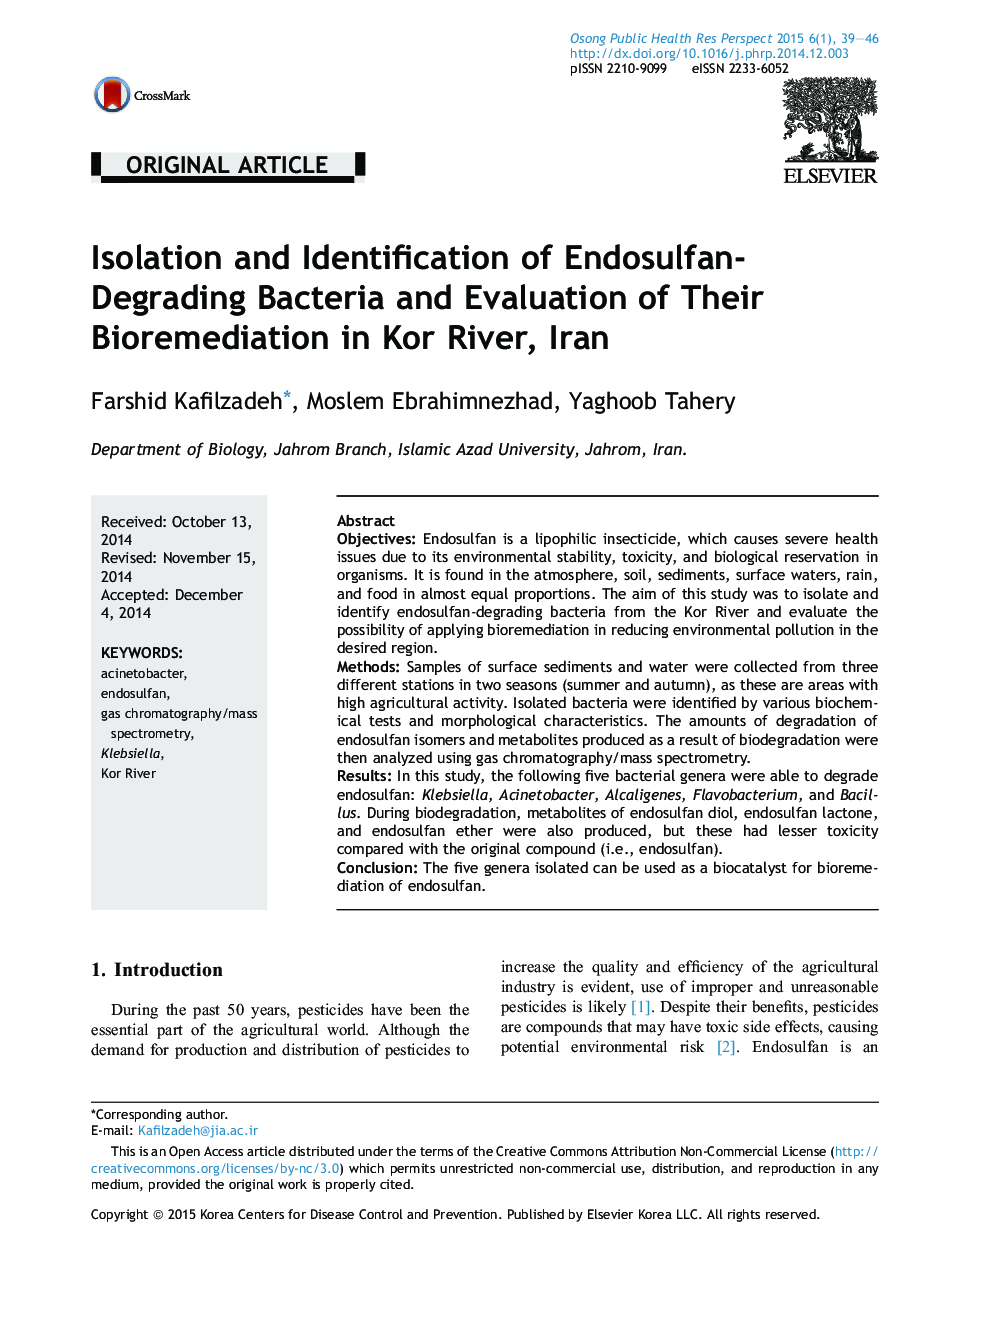 Isolation and Identification of Endosulfan-Degrading Bacteria and Evaluation of Their Bioremediation in Kor River, Iran 